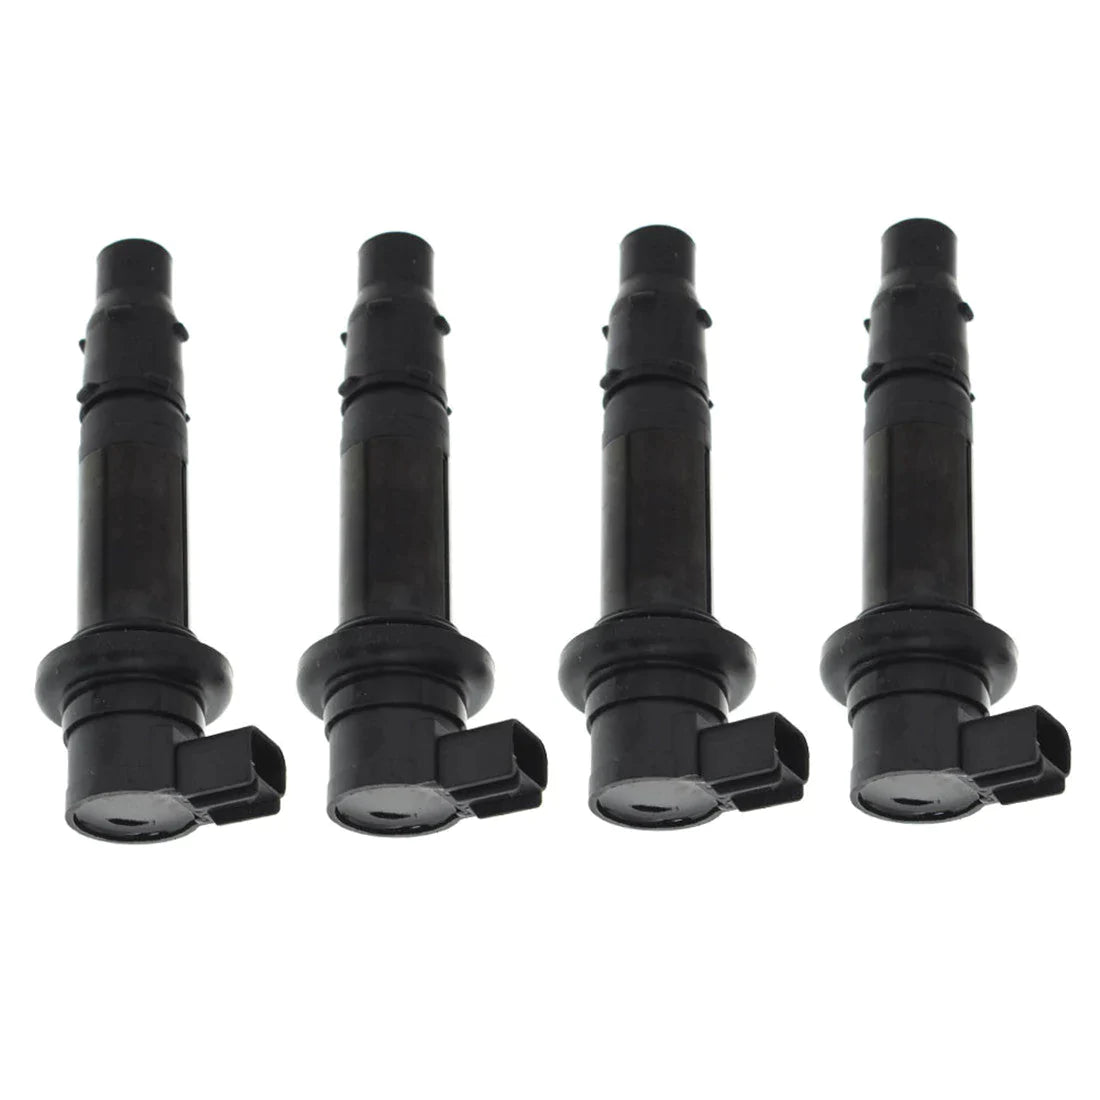 Labwork Set of 4 Ignition Coils 39P-82310-10-00 5PW-82310-00-00 F6T558 Replacement for Yamaha R1 YZF-R1 MT-07 1WS FZ8 R6 RJ15 Bj Engine LAB WORK MOTO